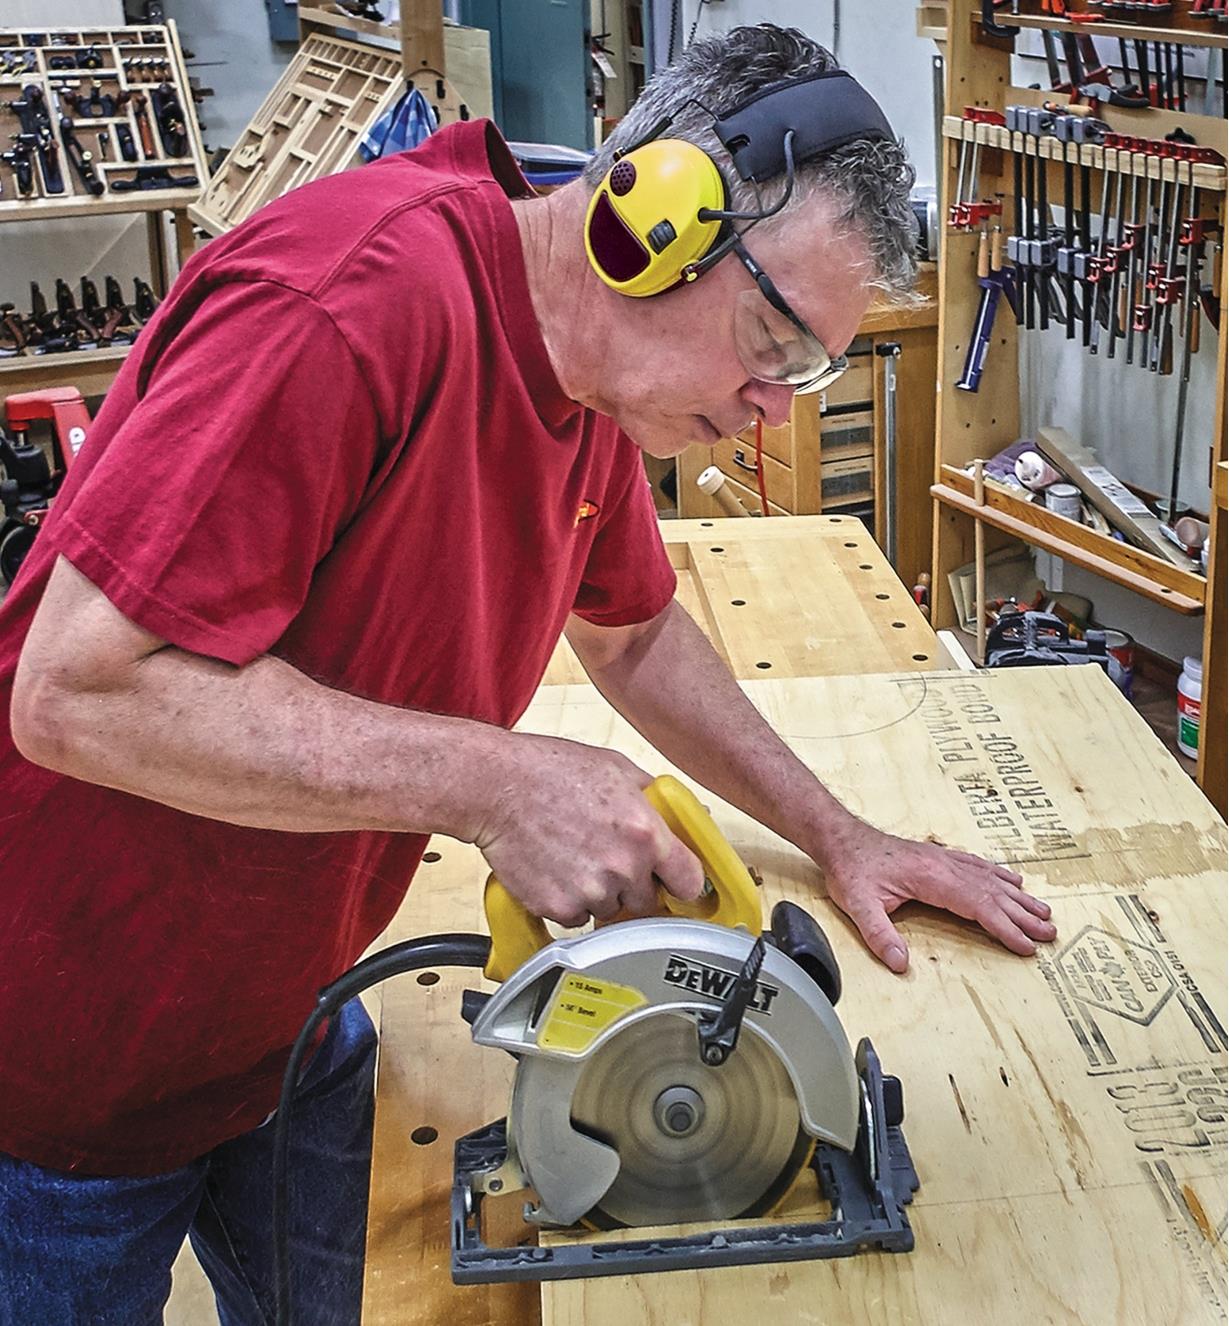 Man wearing active listening hearing protectors in a workshop